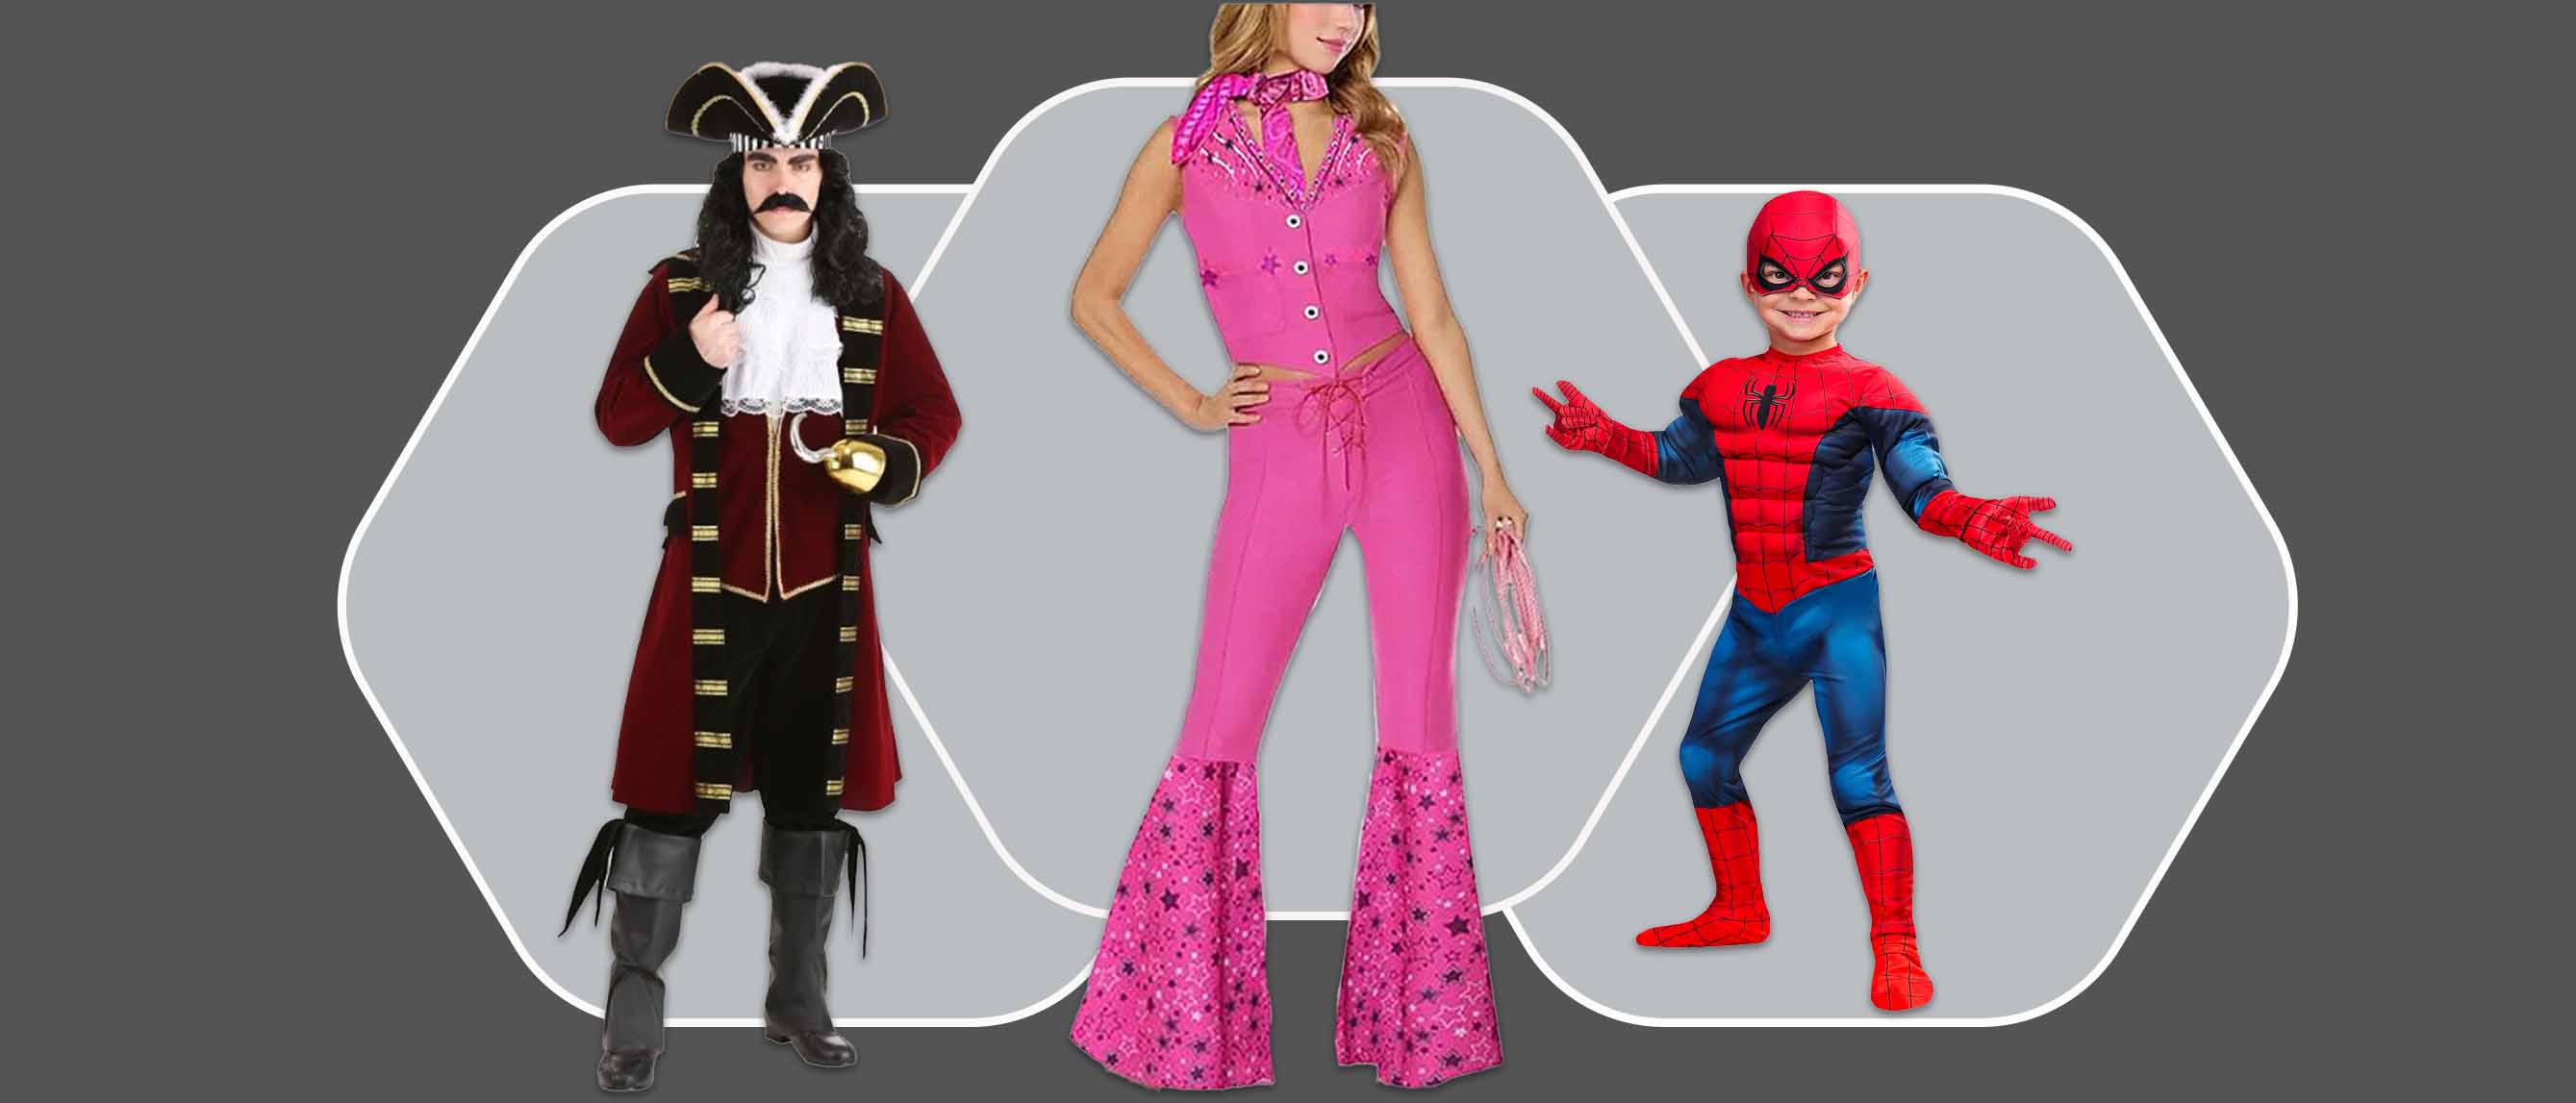 5 Easy to Make Book Character Costumes - C.R.A.F.T.